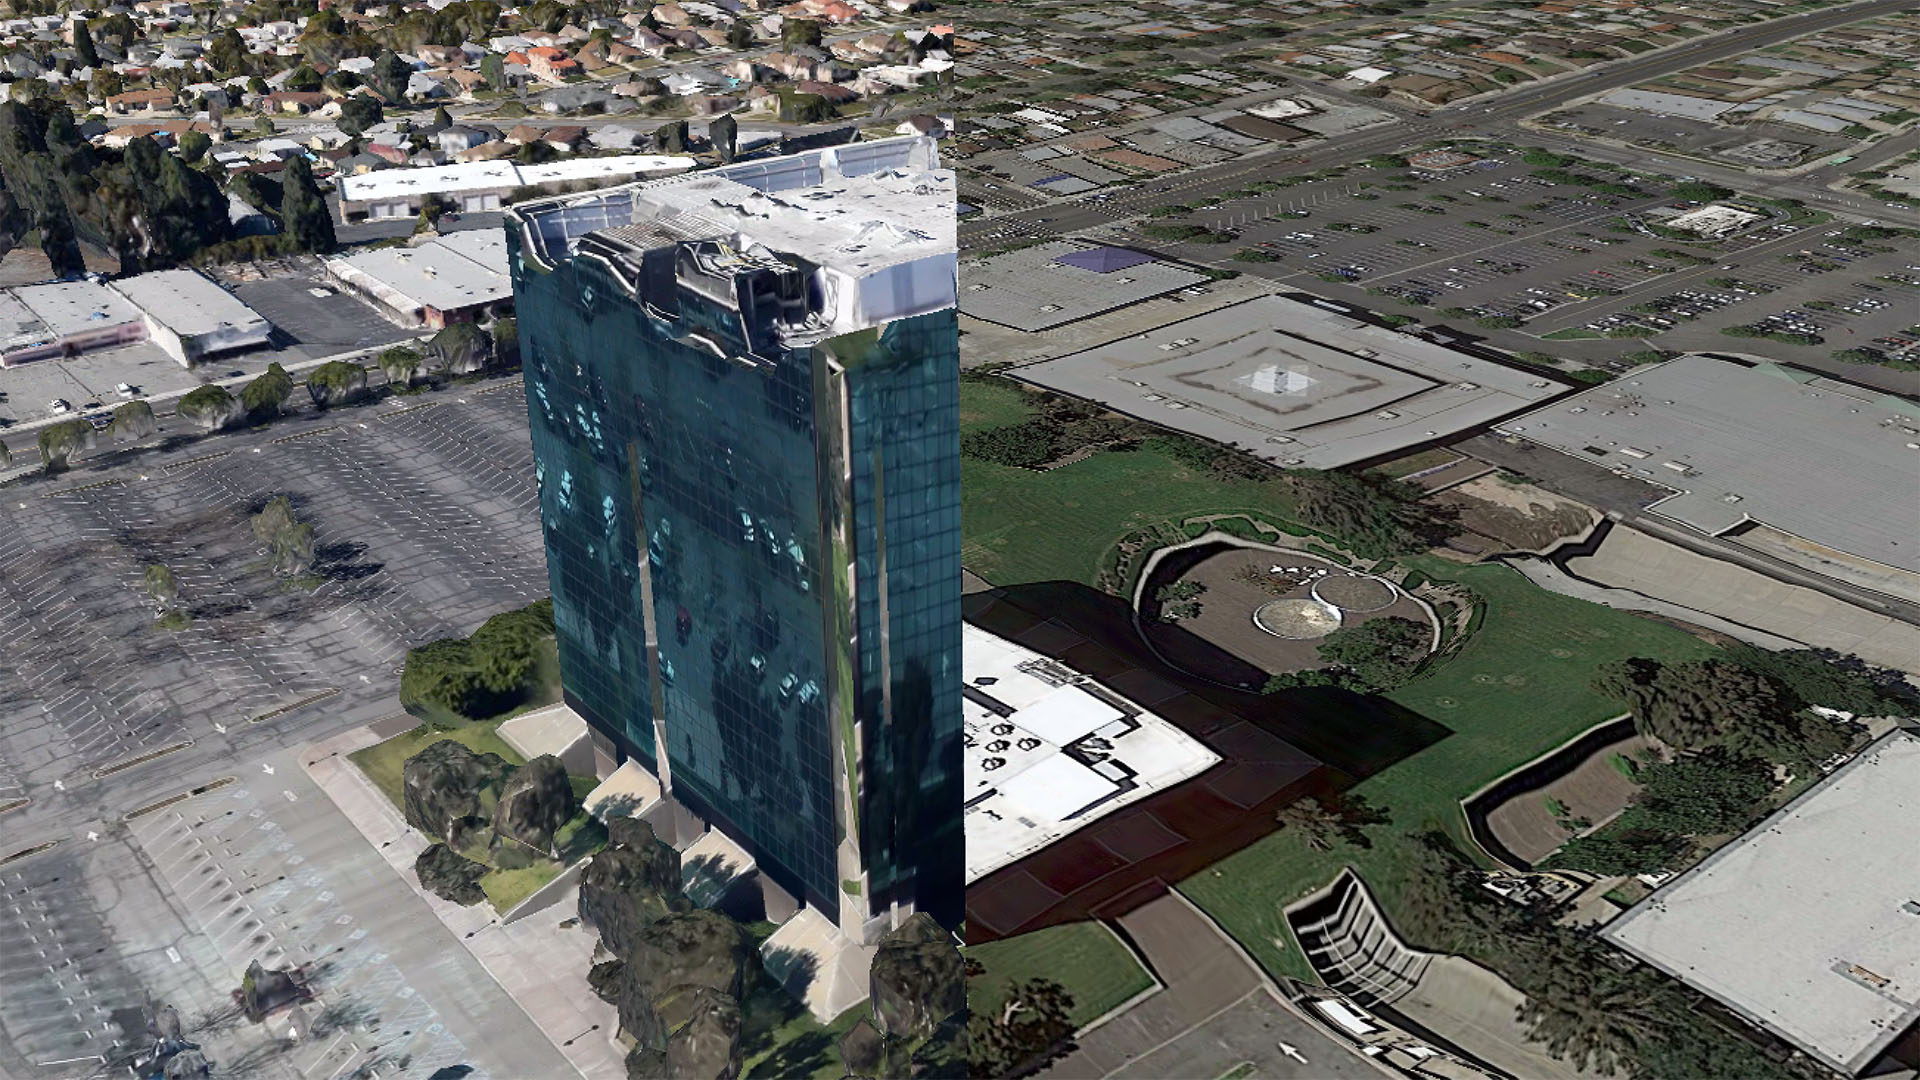 The Los Angeles County Department of Public Works headquarters building in Alhambra, CA, which straddles the frontier of resolution, as rendered in Google Earth 7.1.2.2041.